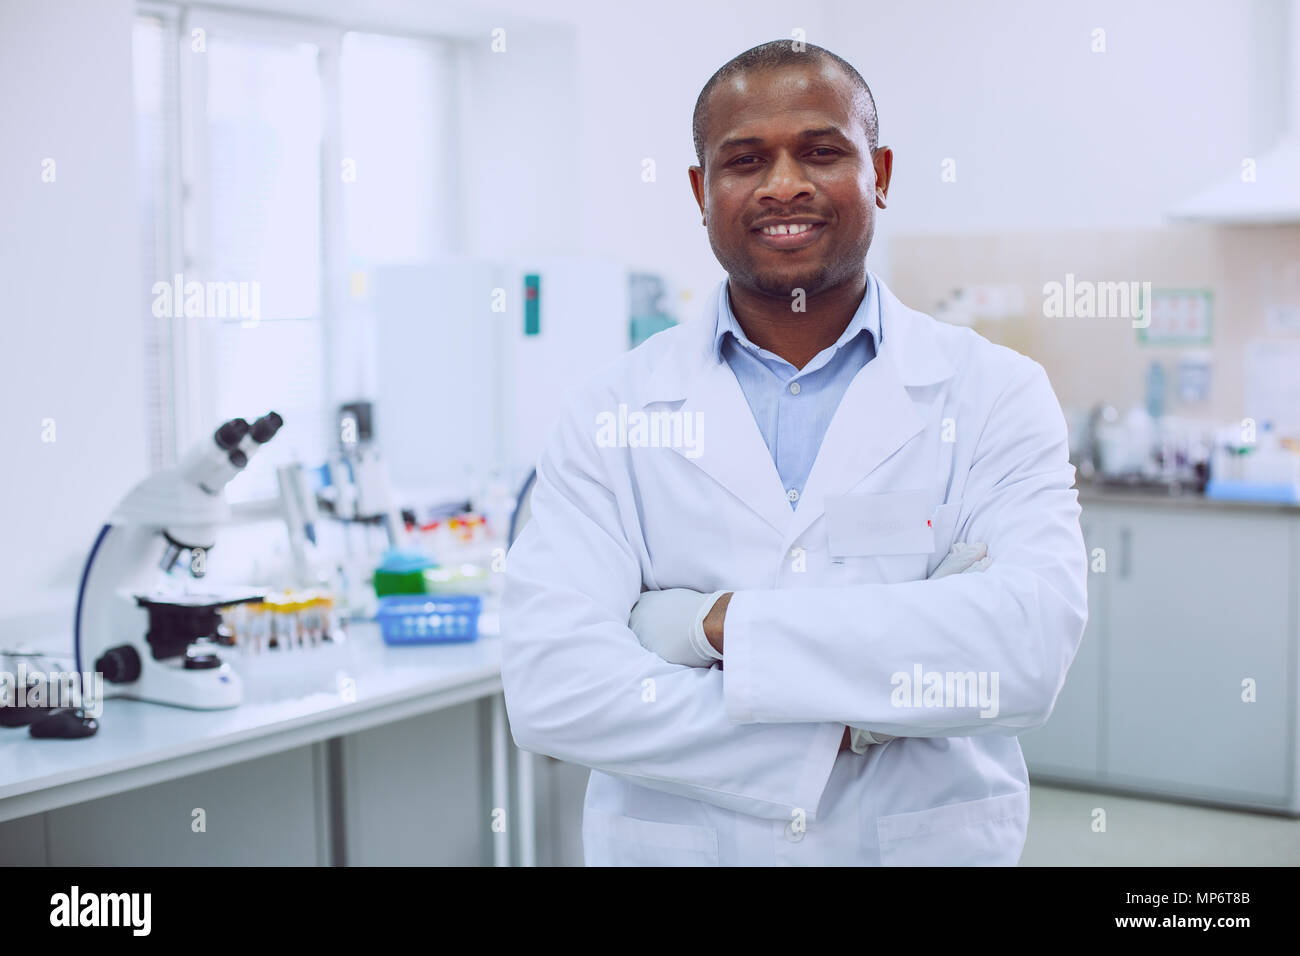 Smiling biologist standing in the lab Stock Photo